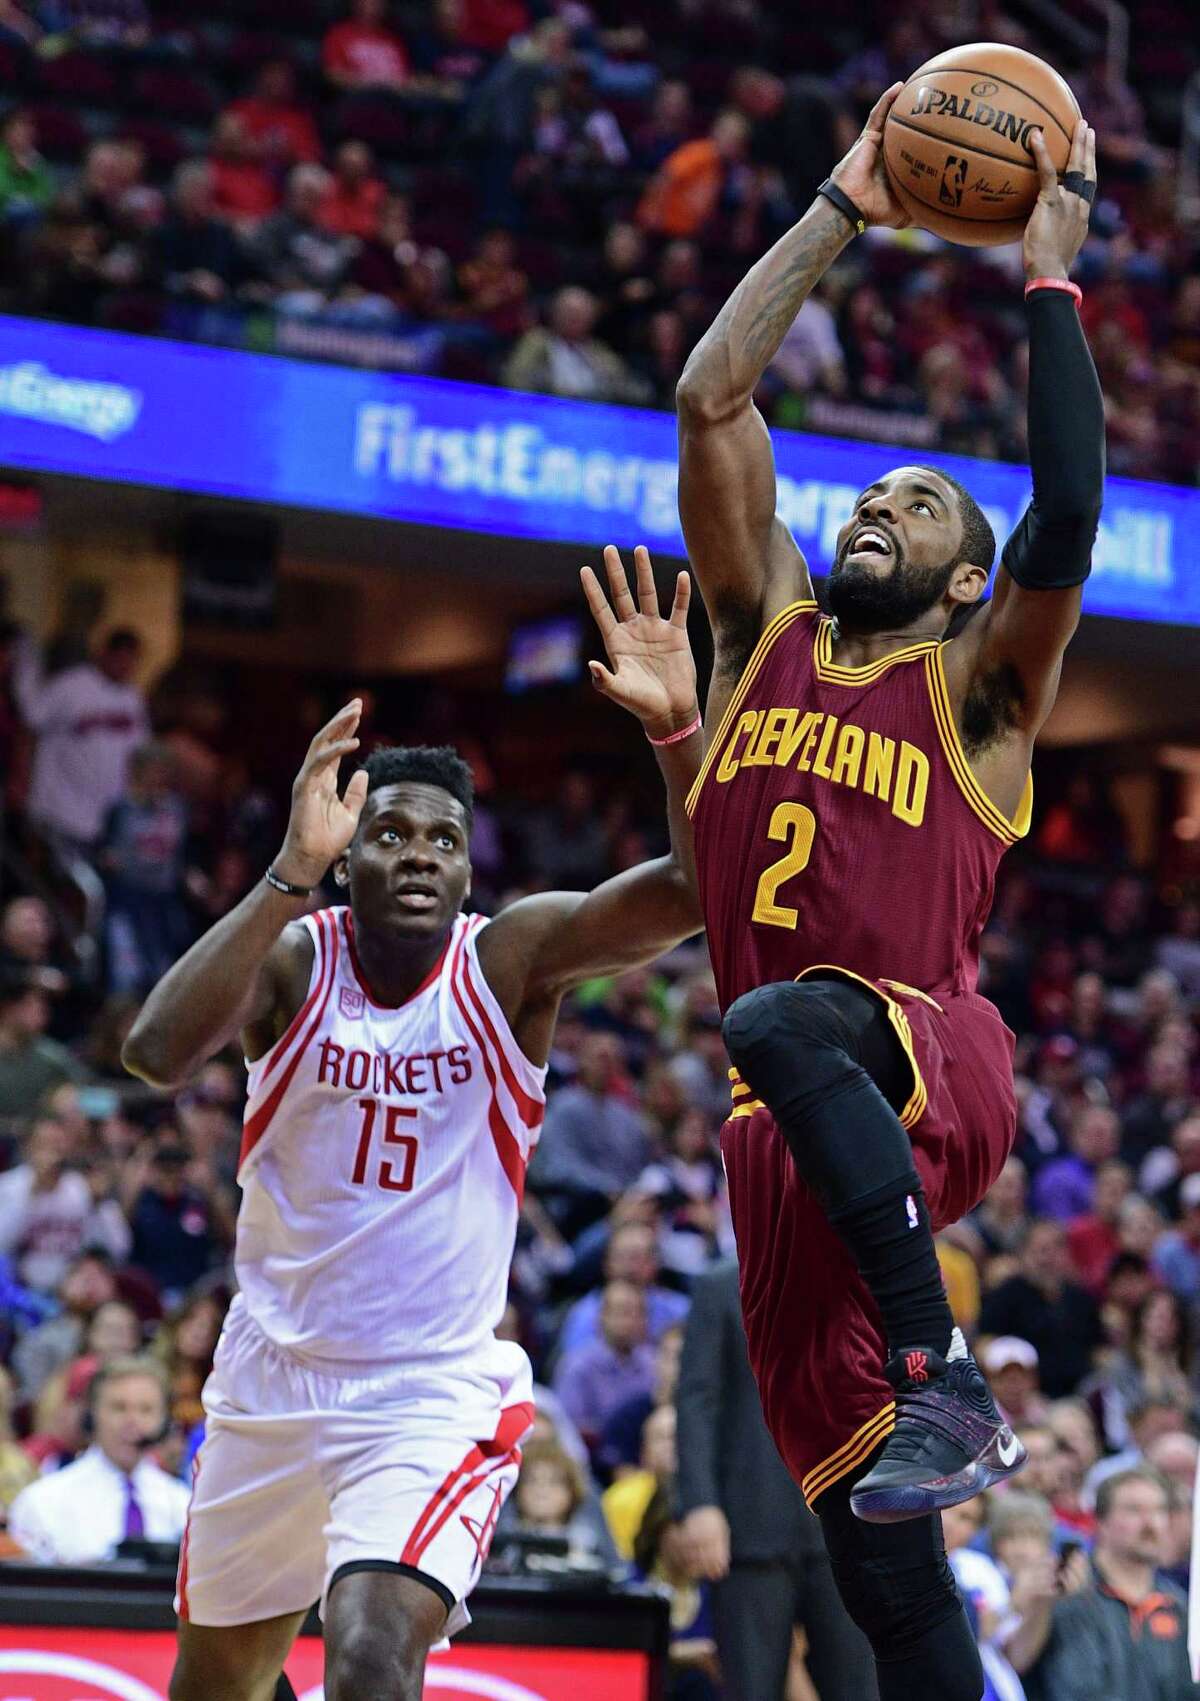 Cleveland Cavaliers guard Kyrie Irving (2) goes in for the dunk while Houston Rockets Clint Capela (15) watches in the first half of an NBA basketball game Tuesday, Nov. 1, 2016, in Cleveland. (AP Photo/David Dermer)